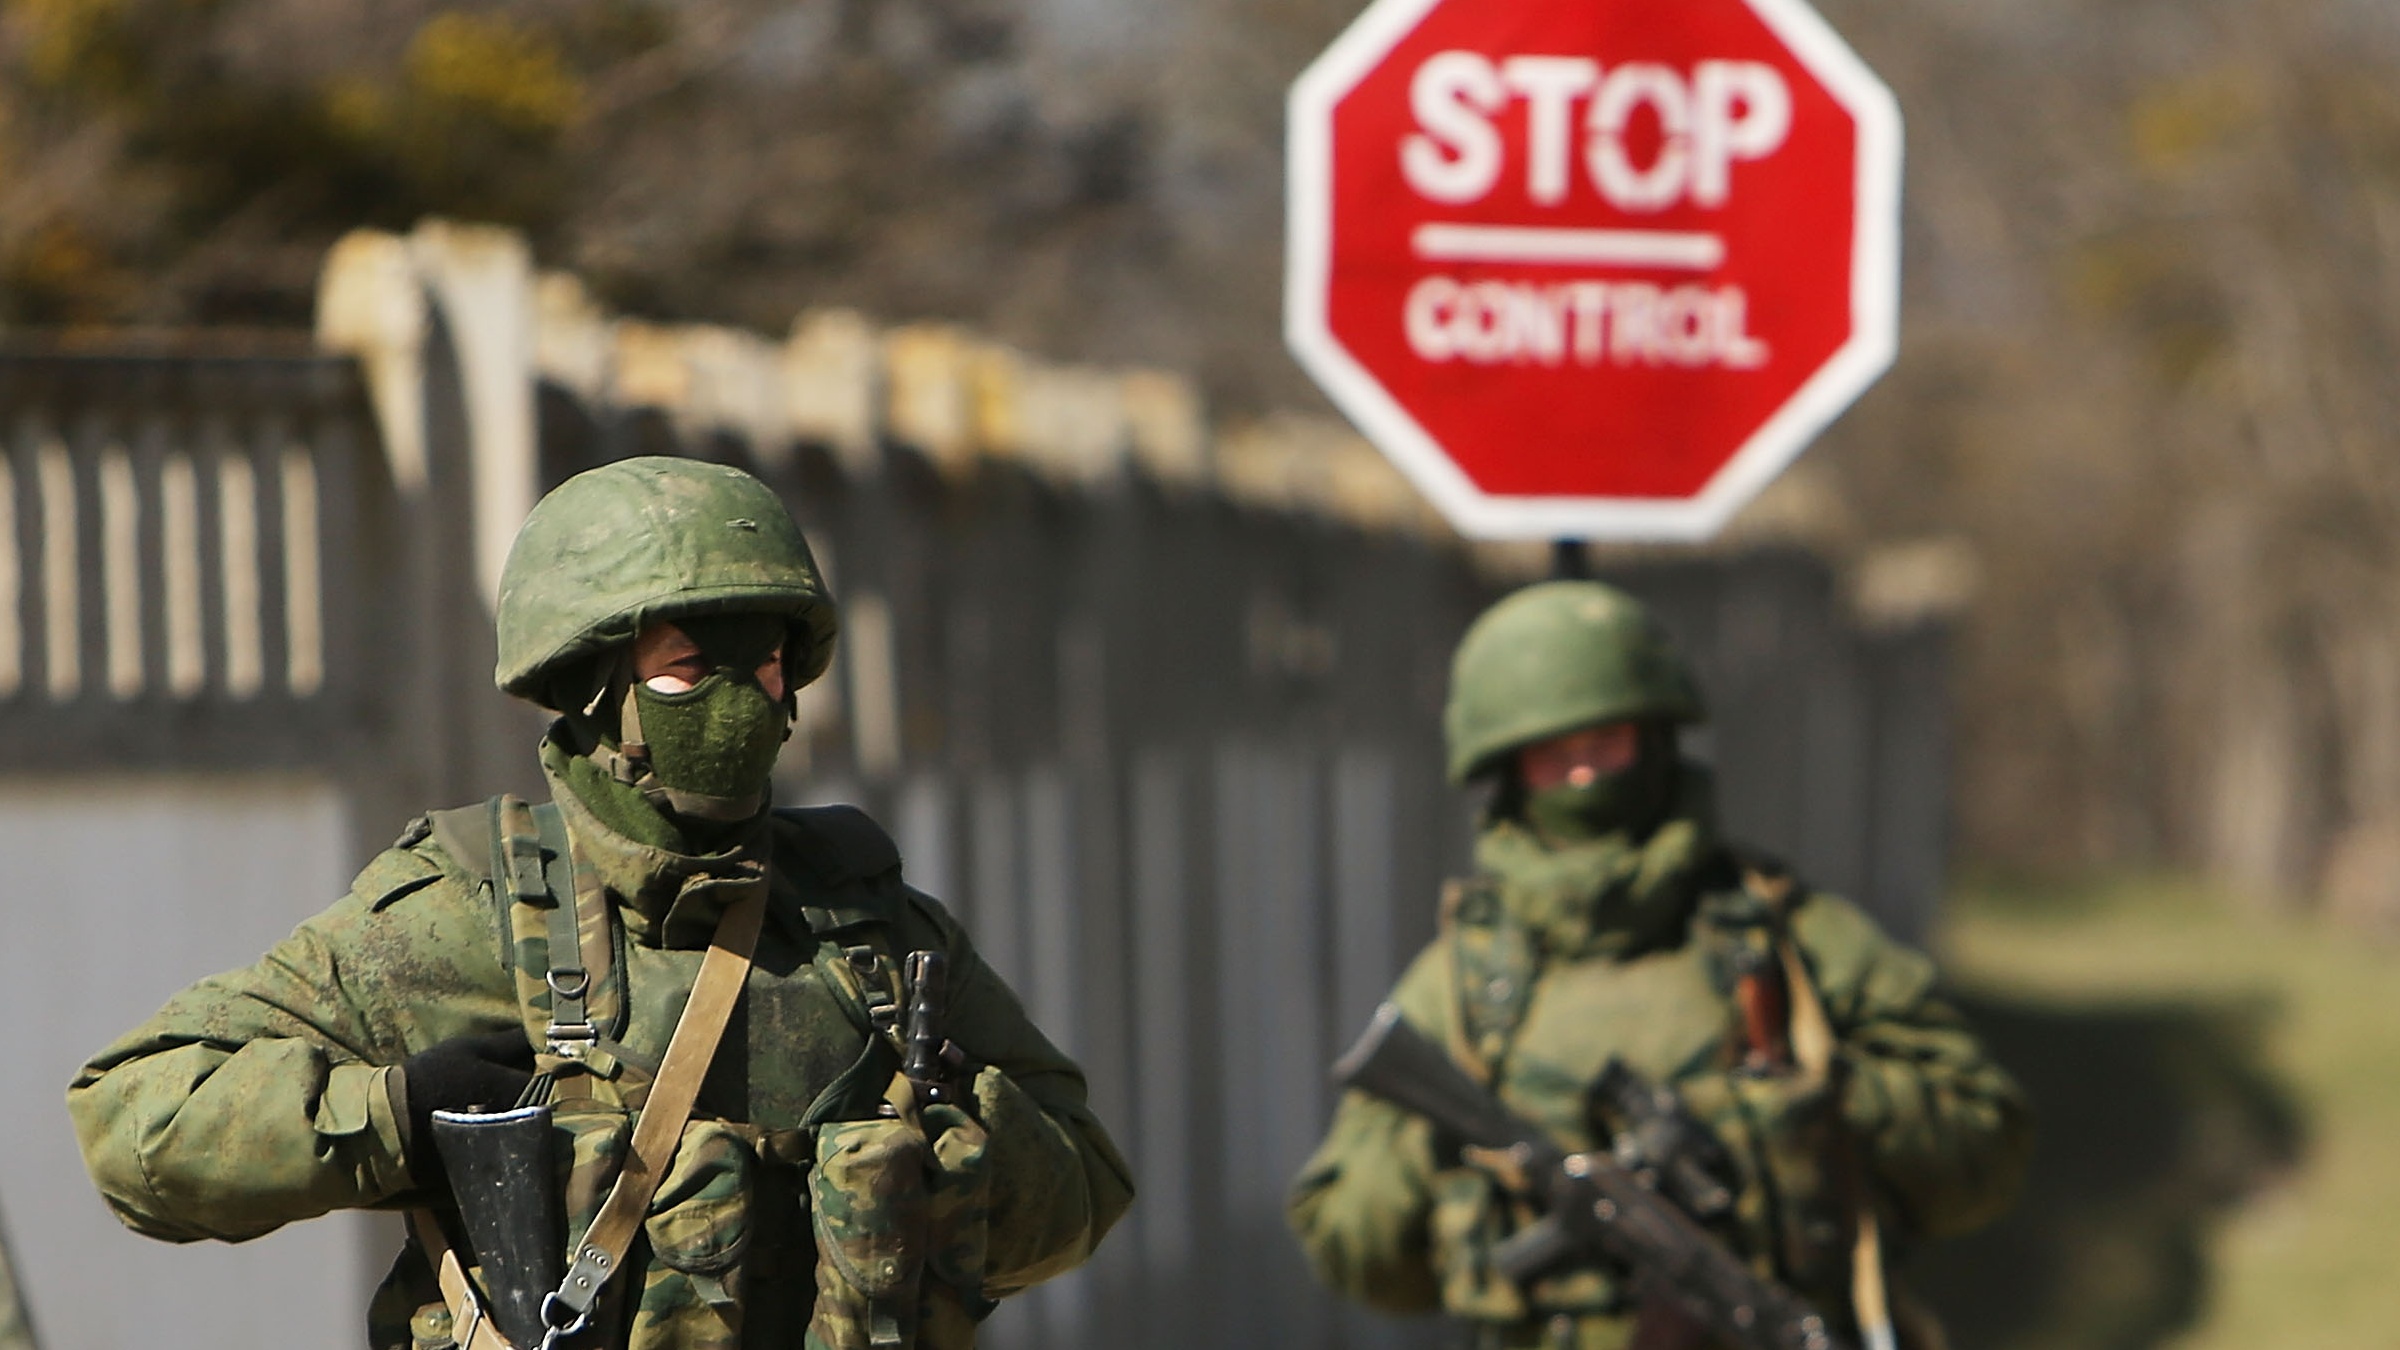 Armed soldiers without identifying insignia stand guard outside a Ukrainian military base in Crimea